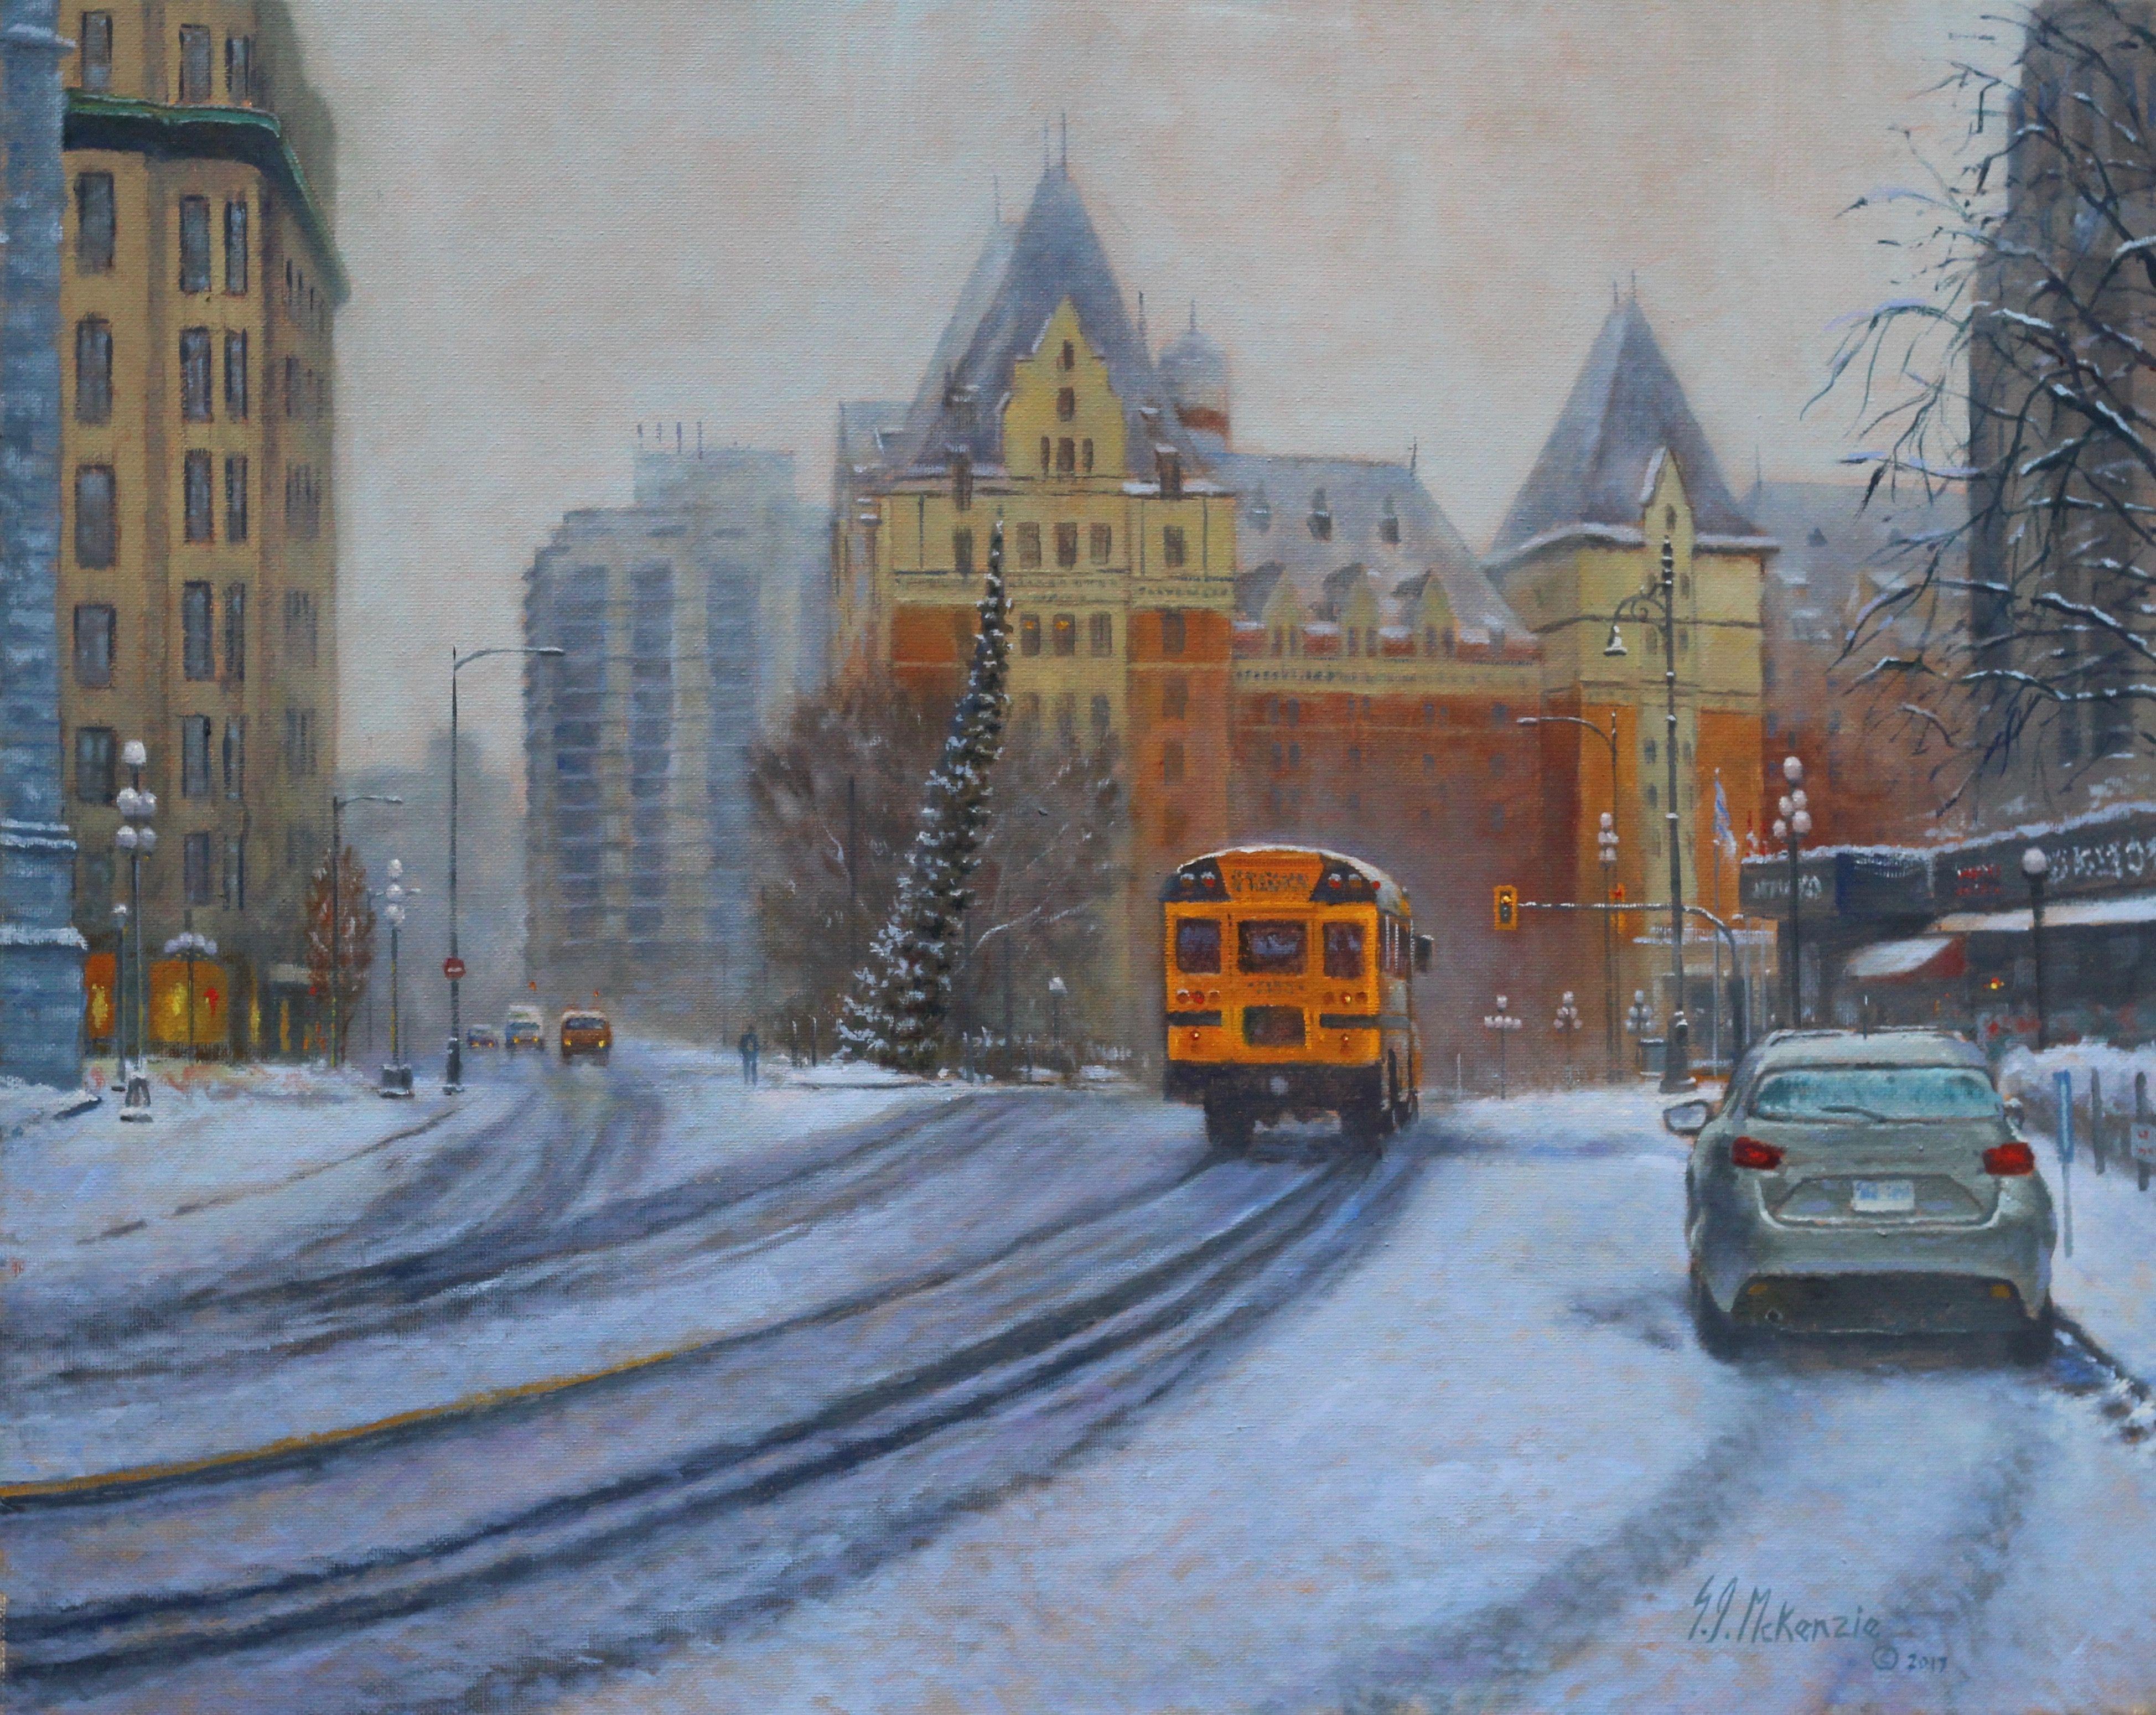 Walking the streets of Victoria during the winter months is very inspiring for an artist. This time of year to see snow on the ground is very rare, however, when is snowing can be very scenic and is full of contrast, such as this one. The white